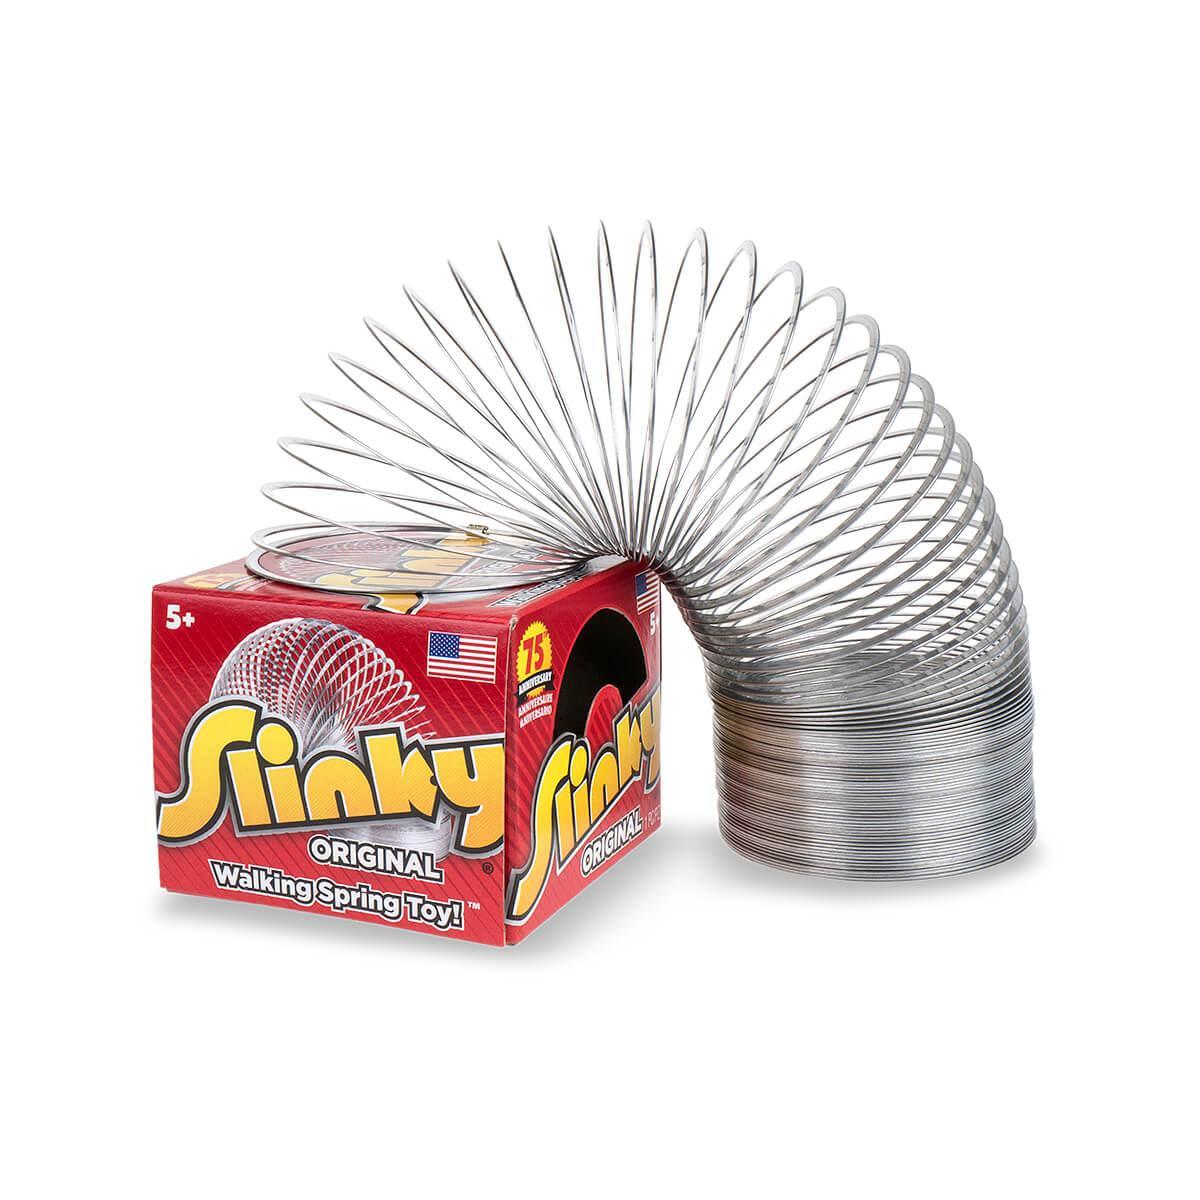 RETRO ORIGINAL  COLLECTORS EDITION SLINKY WALKING SPRING TOY MADE IN THE USA 